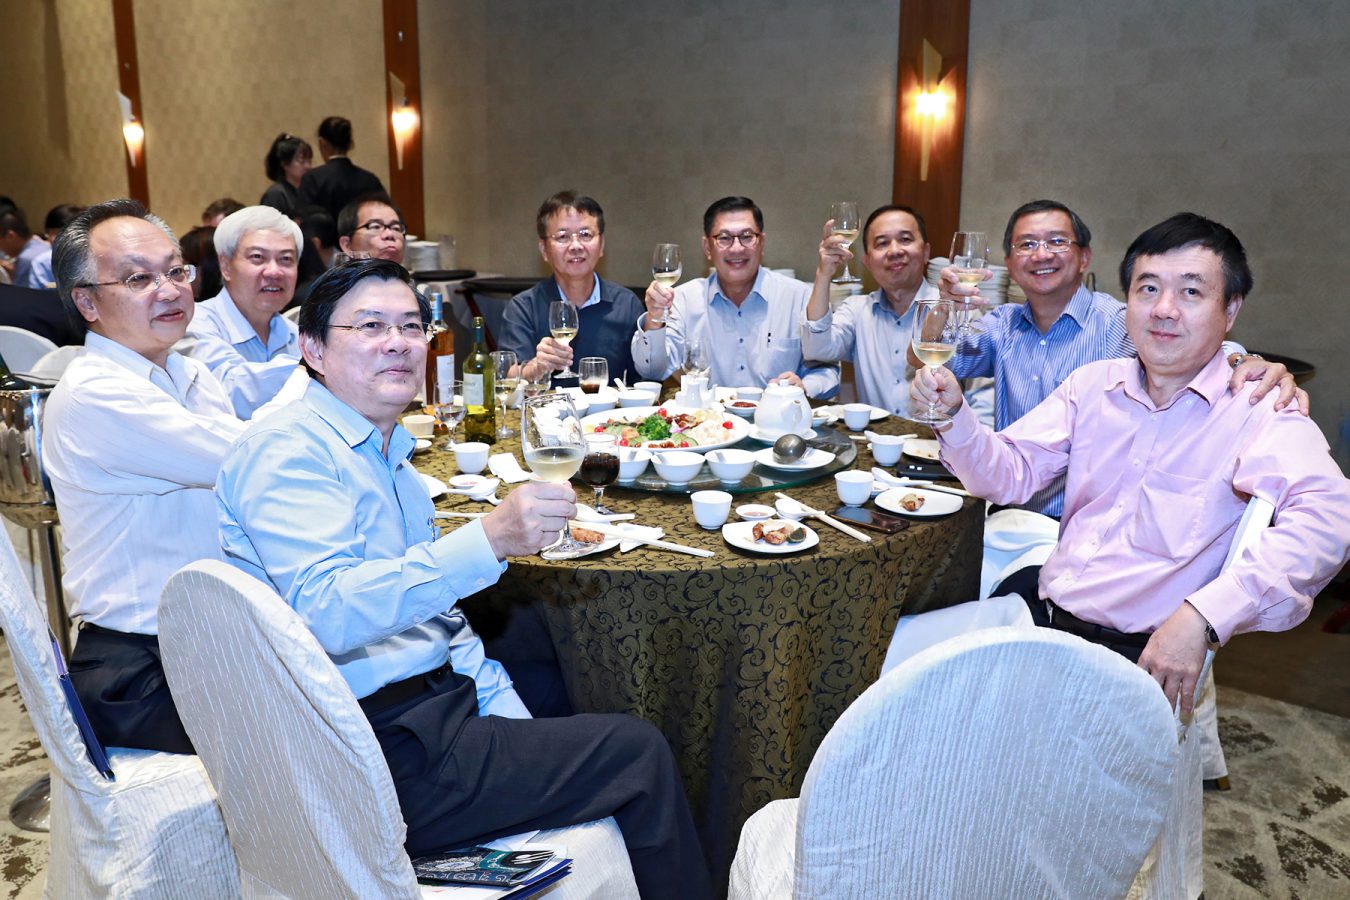 Alumni Er Teo Yen Pai (left), Class of 1984 raising a toast to another good year ahead. The Class of 1984 will be celebrating their 35th anniversary in 2019.